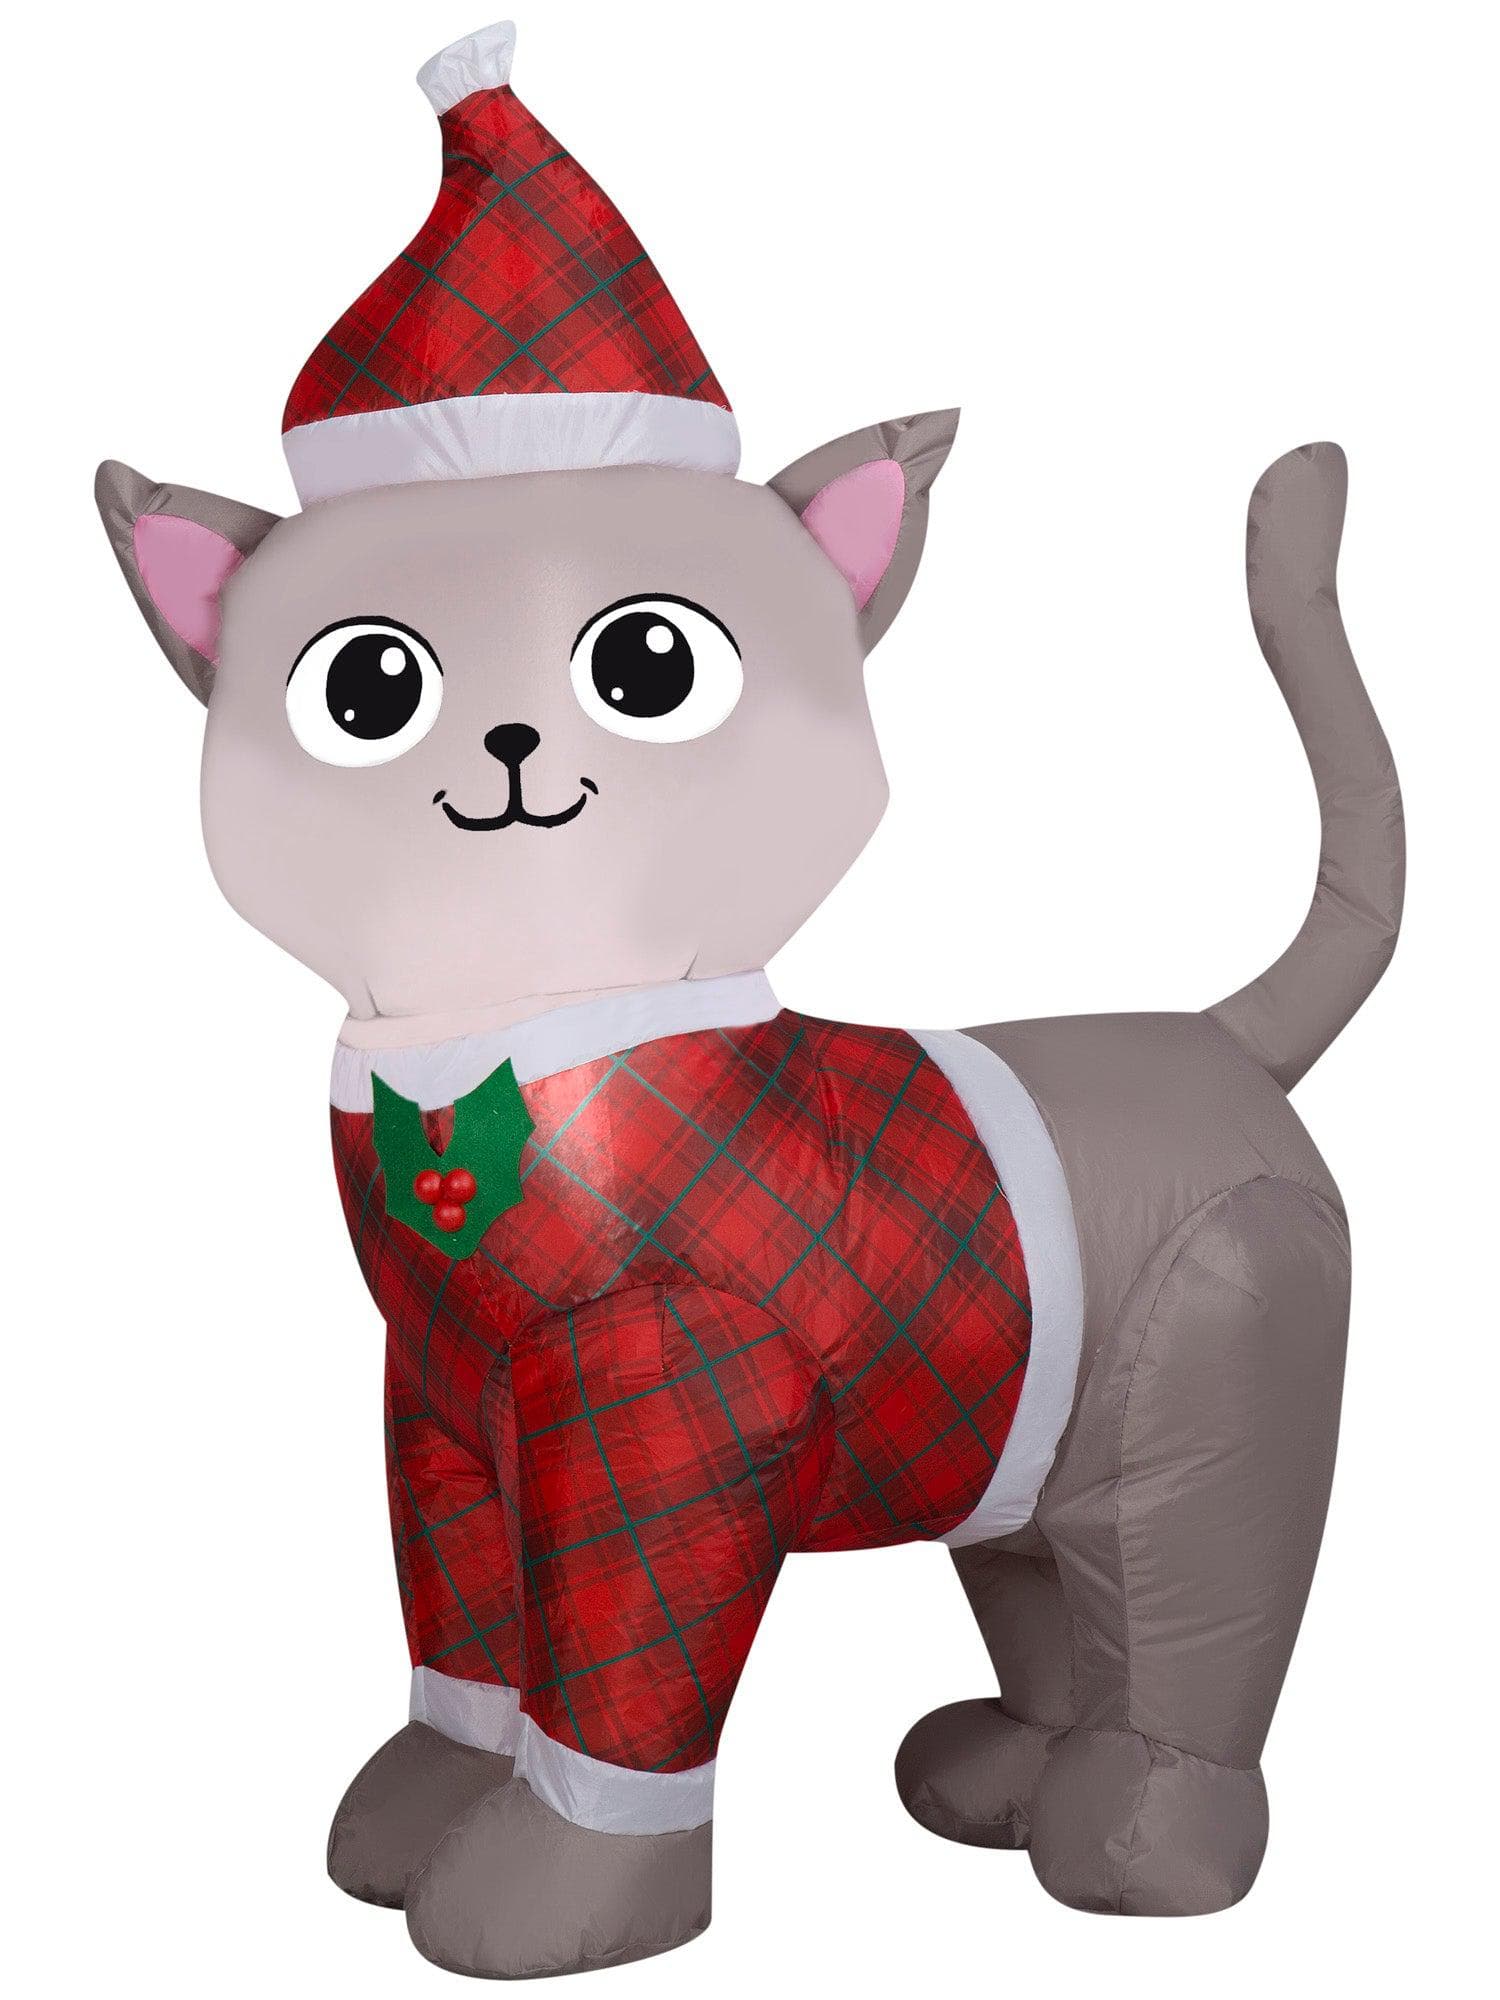 3.5 Foot Kitten Light Up Christmas Inflatable Lawn Decor - costumes.com